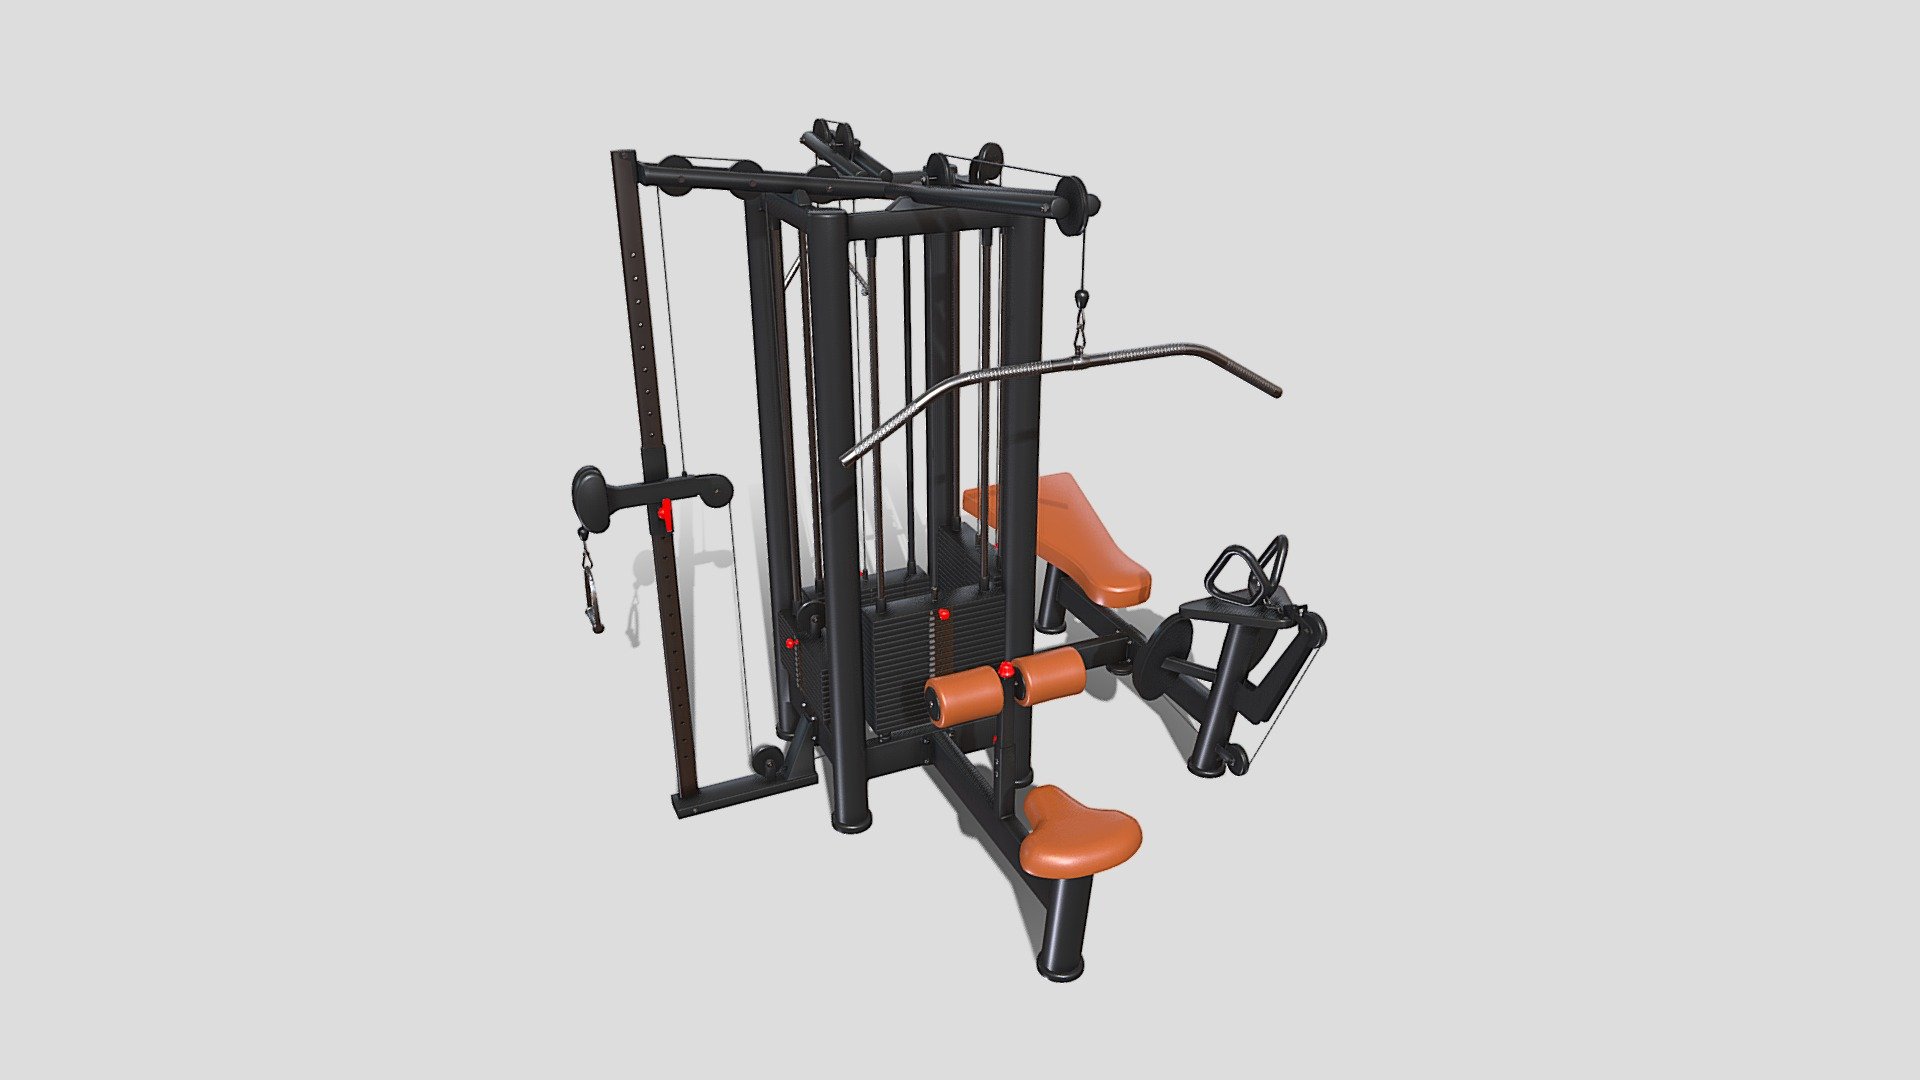 Gym machine 3d model built to real size, rendered with Cycles in Blender, as per seen on attached images. 

File formats:
-.blend, rendered with cycles, as seen in the images;
-.obj, with materials applied;
-.dae, with materials applied;
-.fbx, with materials applied;
-.stl;

Files come named appropriately and split by file format.

3D Software:
The 3D model was originally created in Blender 3.1 and rendered with Cycles.

Materials and textures:
The models have materials applied in all formats, and are ready to import and render.
Materials are image based using PBR, the model comes with five 4k png image textures.

Preview scenes:
The preview images are rendered in Blender using its built-in render engine &lsquo;Cycles'.
Note that the blend files come directly with the rendering scene included and the render command will generate the exact result as seen in previews.

General:
The models are built mostly out of quads.

For any problems please feel free to contact me.

Don't forget to rate and enjoy! - 4 Multi Station Jungle Machine V2 - Buy Royalty Free 3D model by dragosburian 3d model